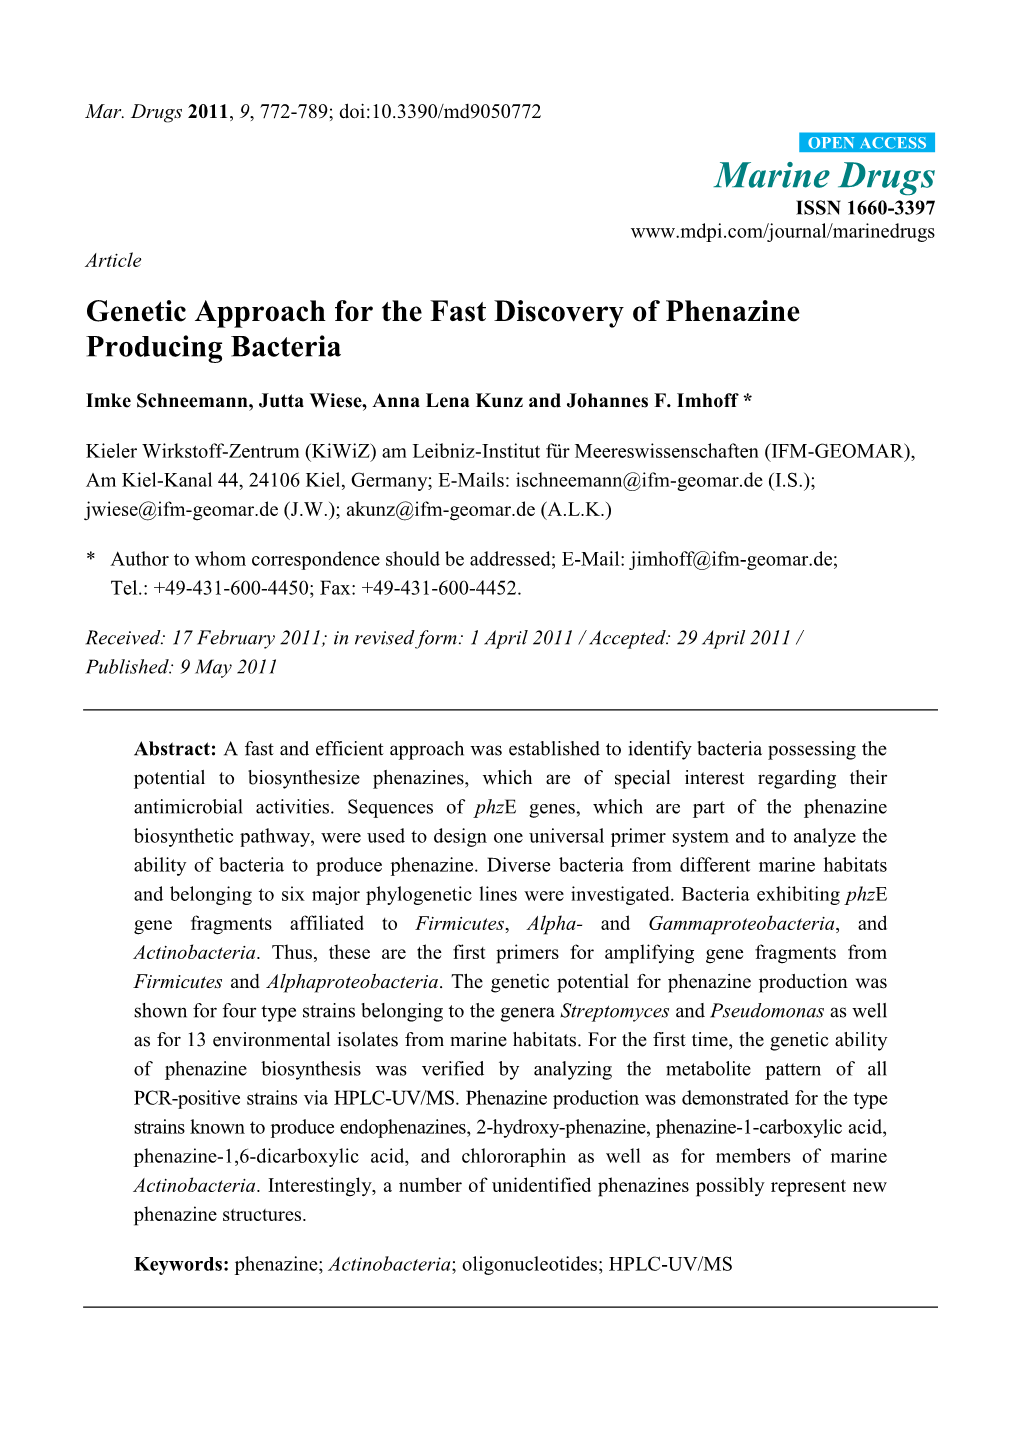 Genetic Approach for the Fast Discovery of Phenazine Producing Bacteria